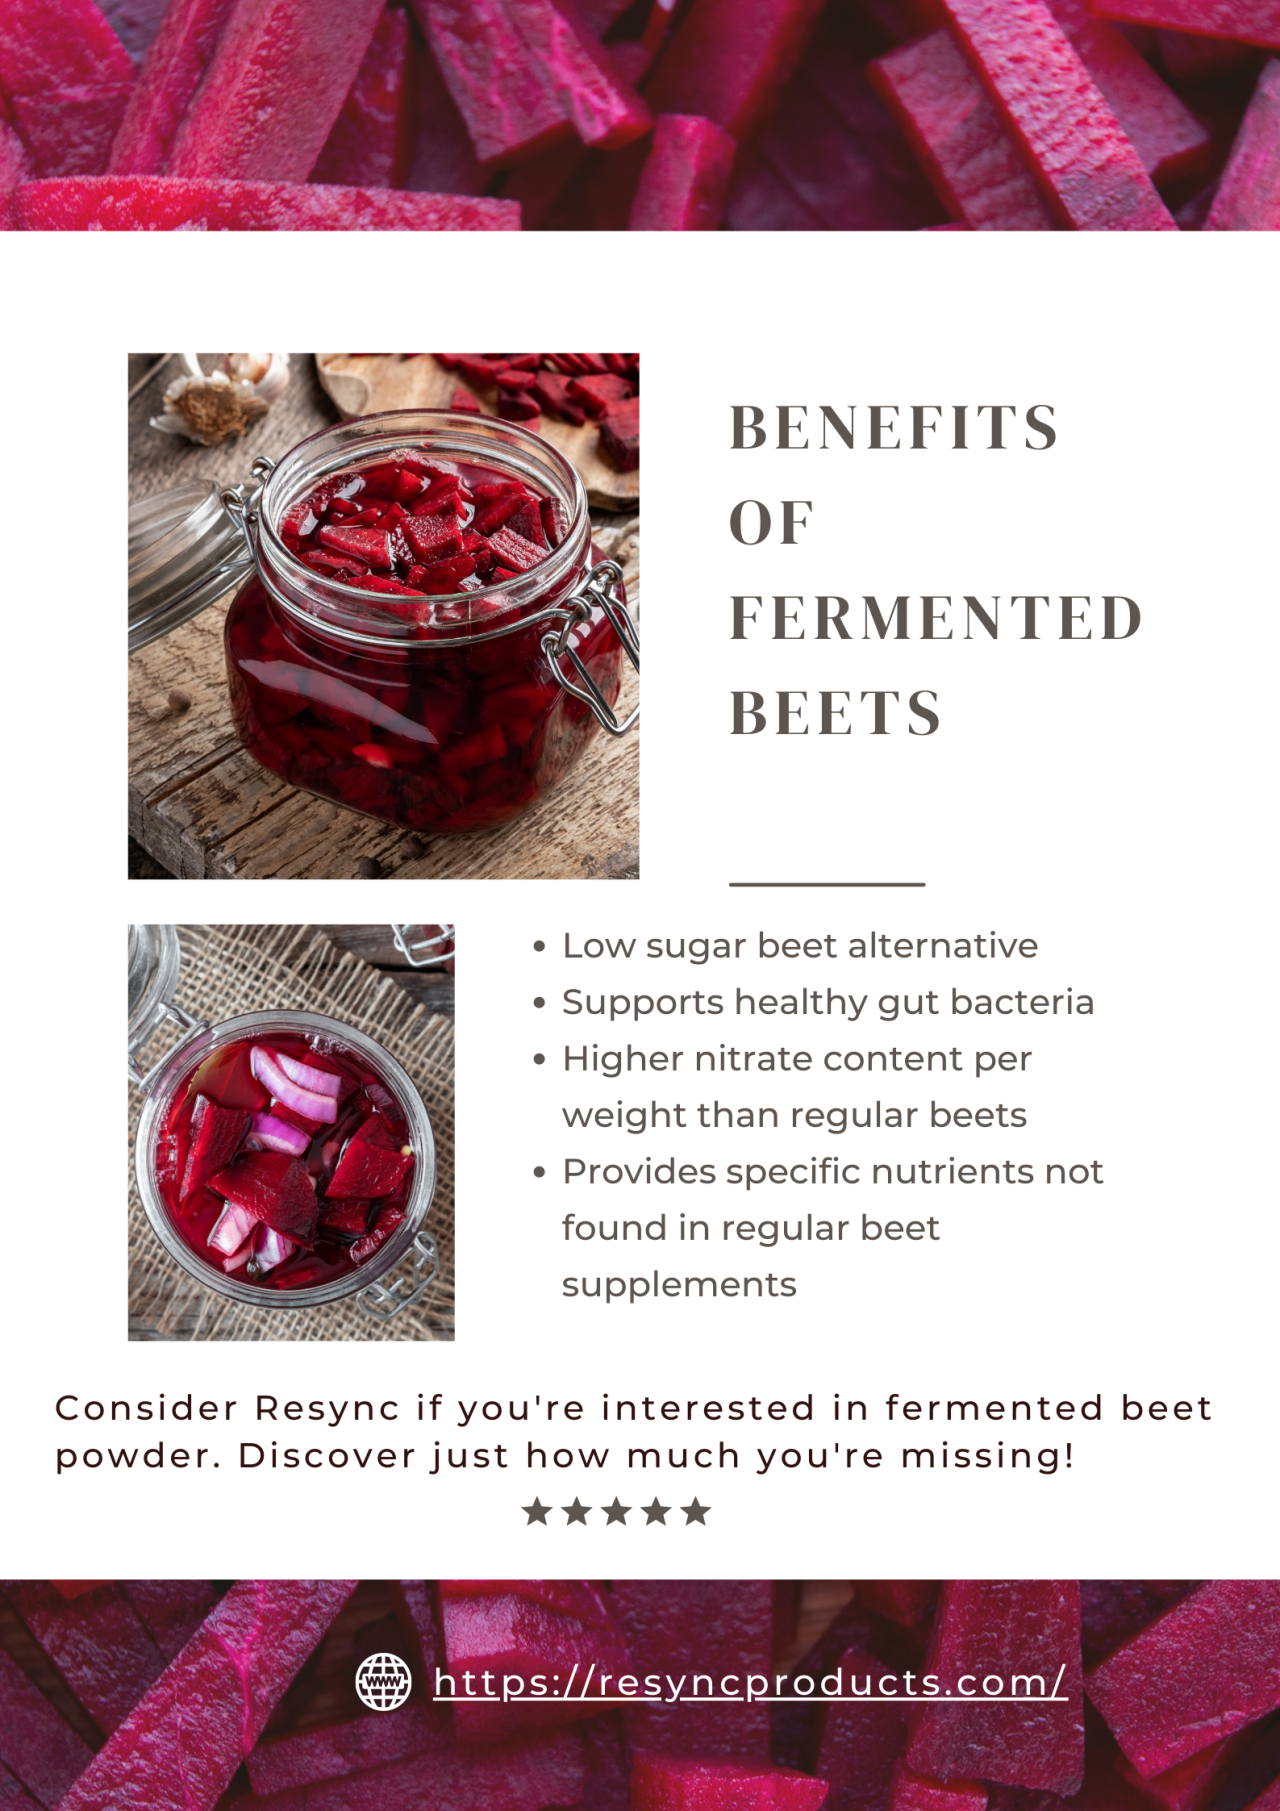 Fermented Beet Powder - Resync Products
At RESYNC, our products address vital molecules in your body, including collagen, nitric oxide, and fermented beet powder. We offer a wide variety of high-quality drinks that support your health and help keep...